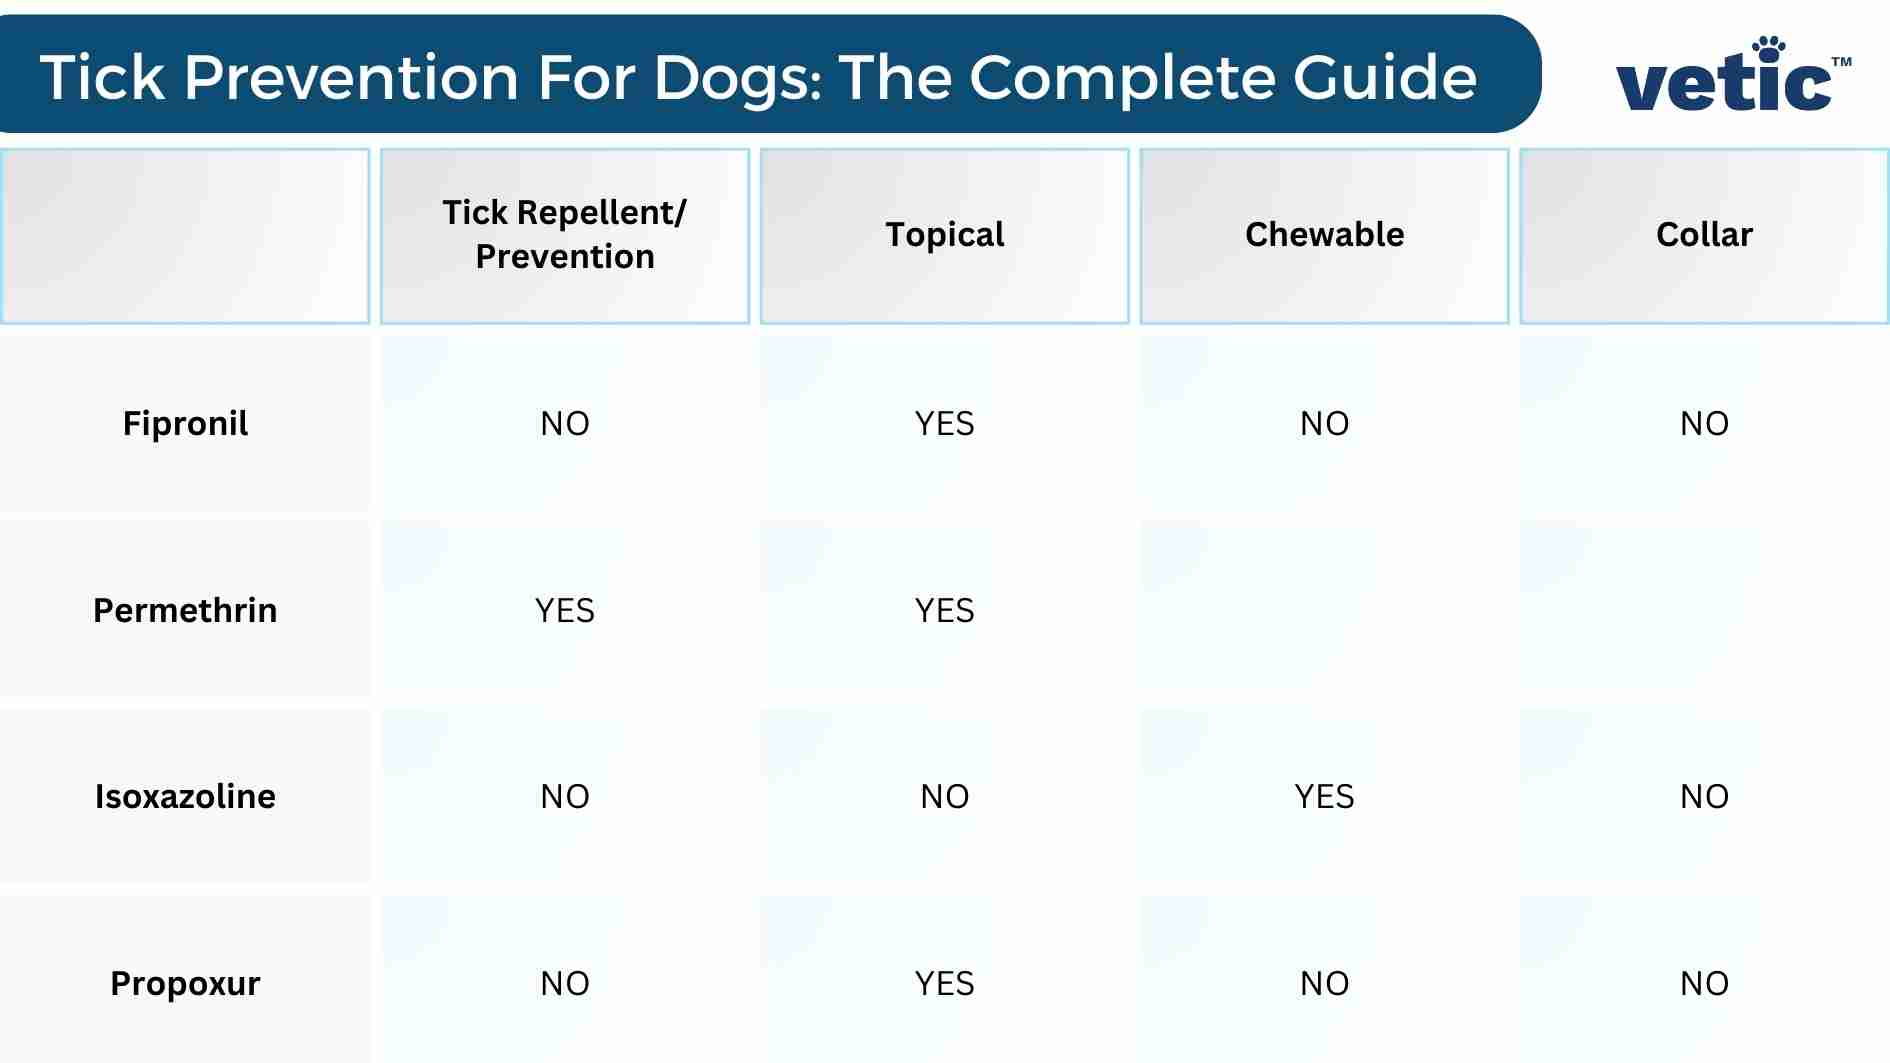 Tick prevention for dogs - the complete guide by Vetic veterinary services. it includes a table of the different common tick repellents and killing agents, their mode of application, nature of action. the chemical components and their actions are as follows - Fipronil is a topical solution that doesn't repel ticks. Permethrin repels ticks and it is available as spot-on solutions. Isoxazoline is a chewable tablet that doesn't repel ticks. Propoxur is an insecticide that kills ticks upon contact but doesn't repel them.